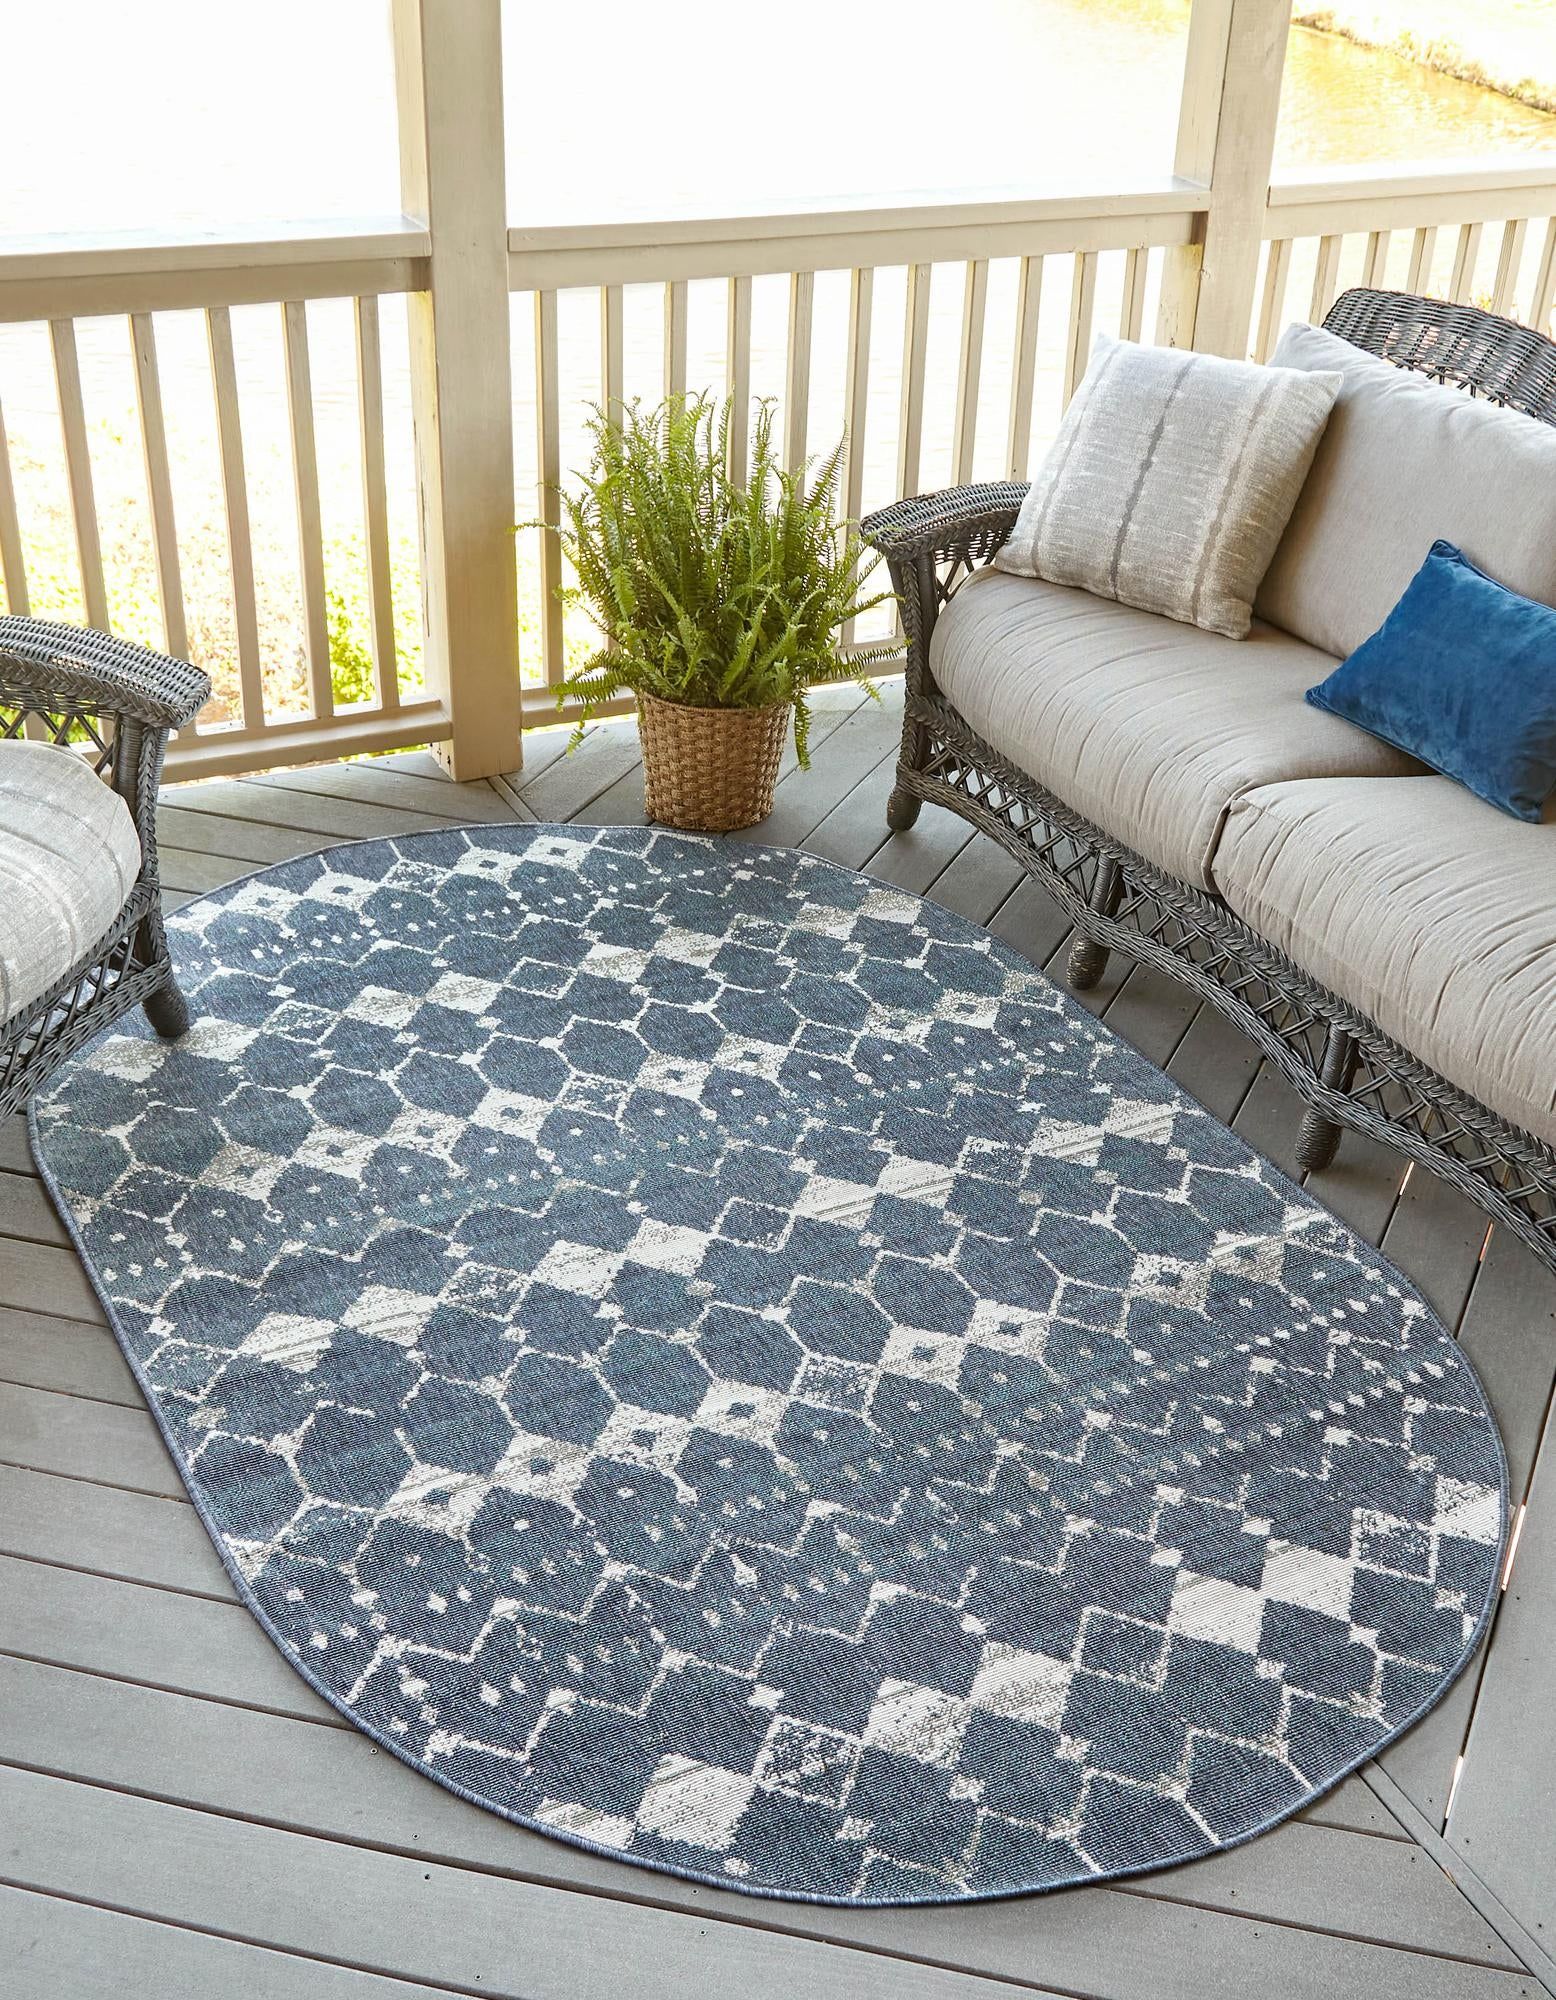 Rugs Outdoor Lattice Collection Rug – 5' X 8' Oval Navy Blue Flatweave  Rug Perfect For Living Rooms, Large Dining Rooms, Open Floorplans –  Walmart In Lattice Oval Rugs (View 7 of 15)